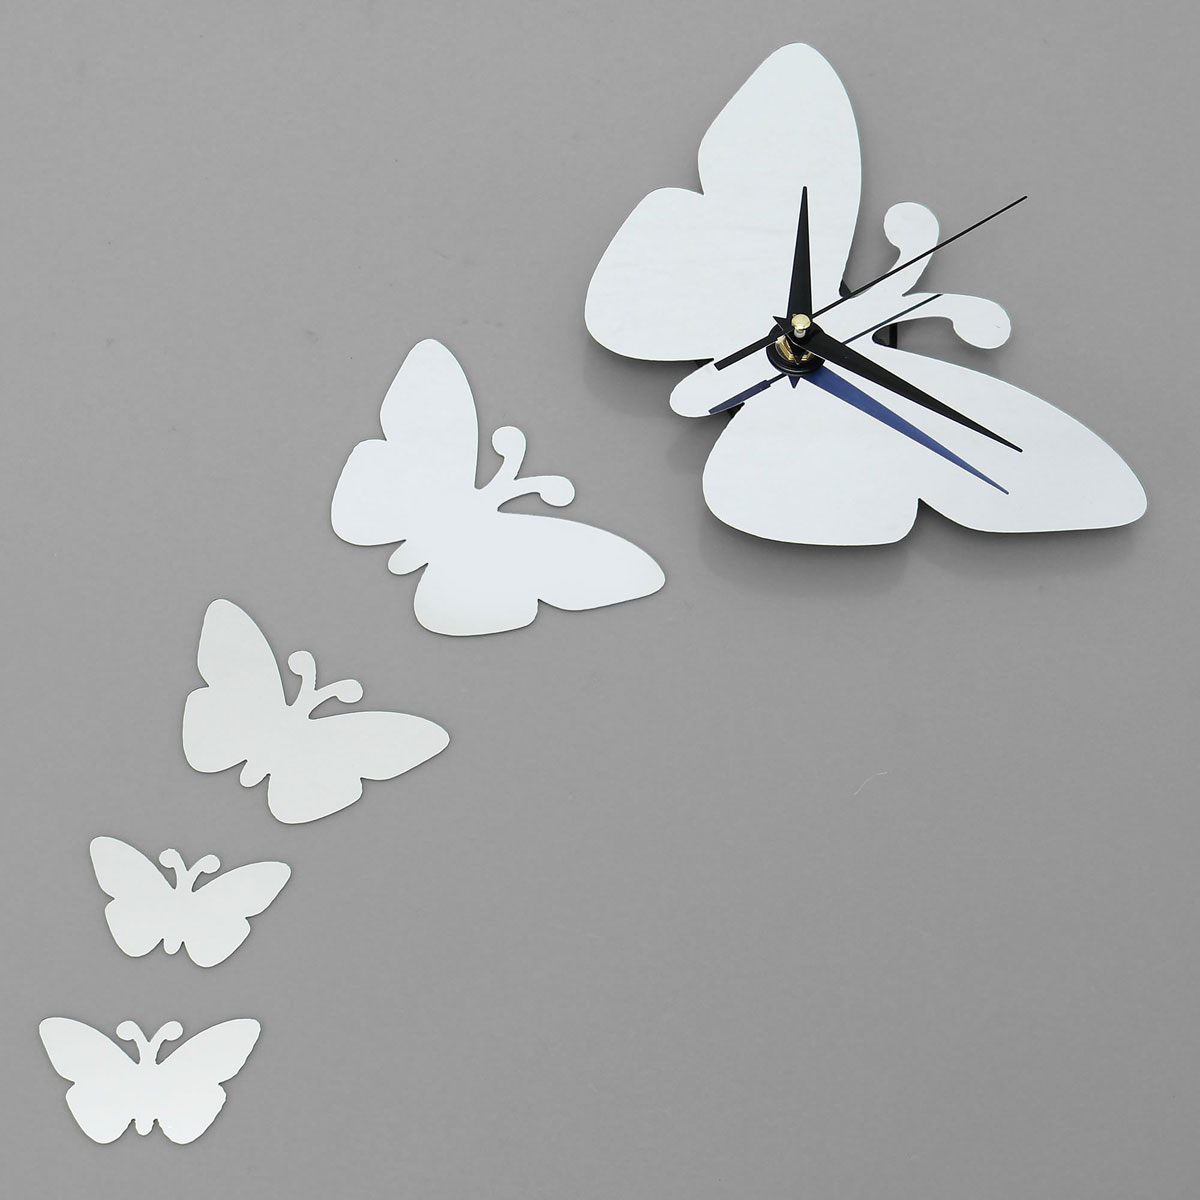 Butterfly-Wall-Clock-Sticker-Specular-Surface-Wall-Sticker-Home-Decoration-1082153-2